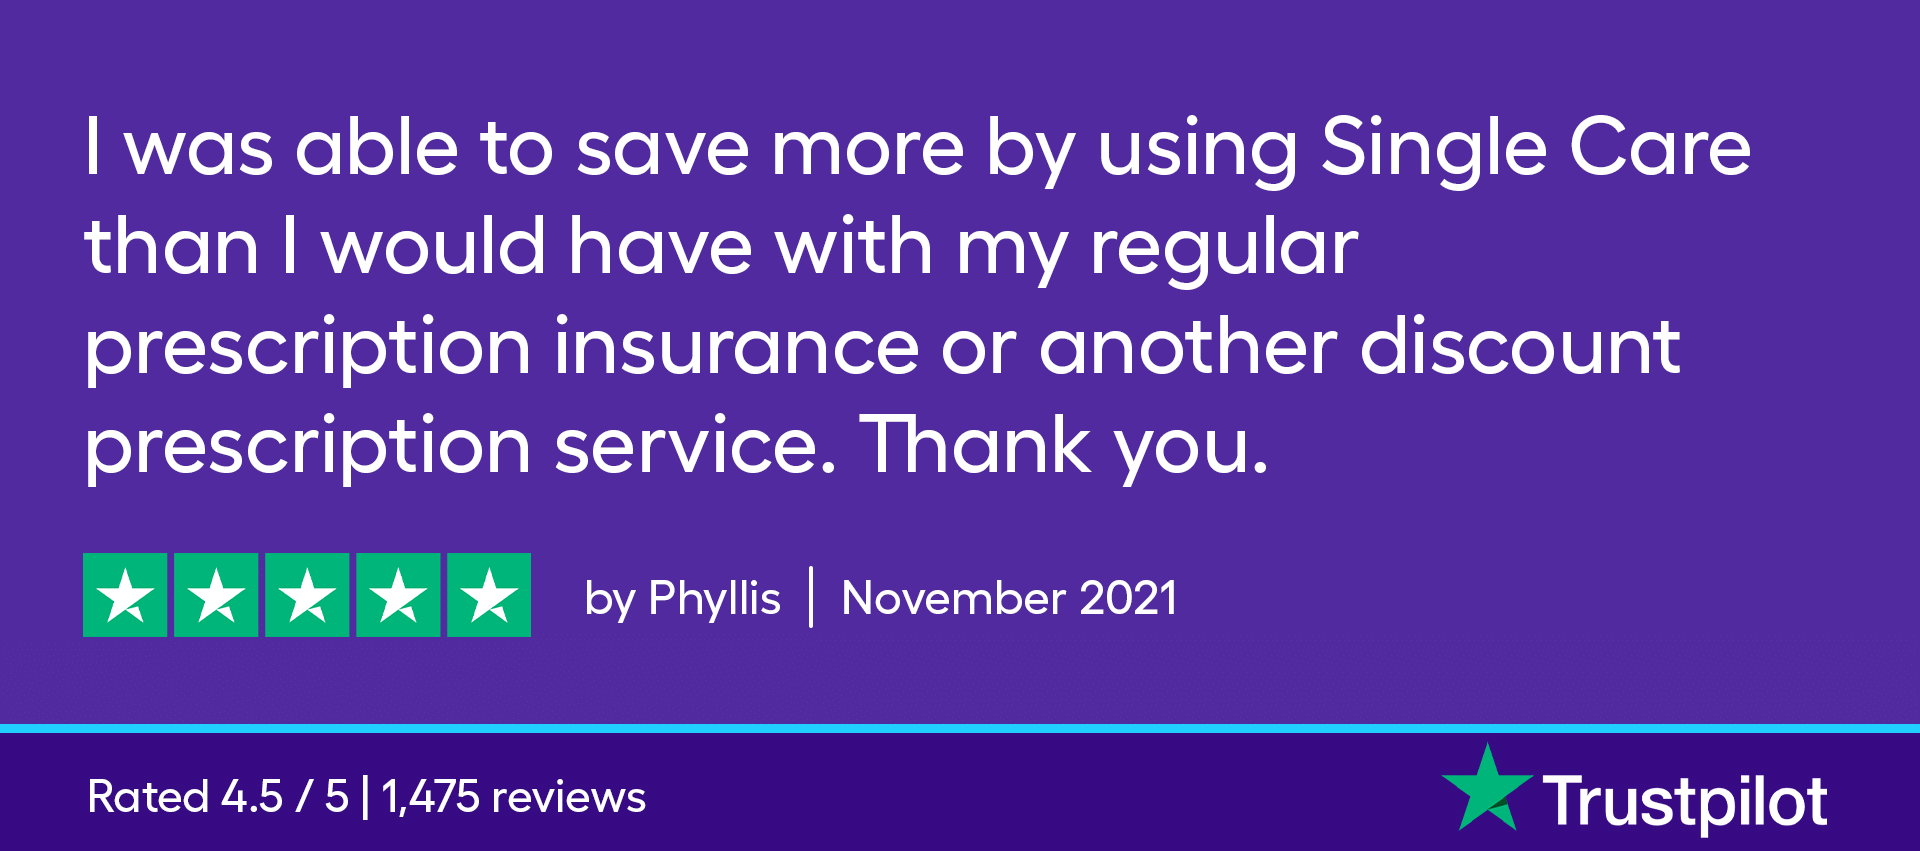 I was able to save more by using SingleCare than I would have with my regular prescription insurance or another discount prescription service. Thank you.